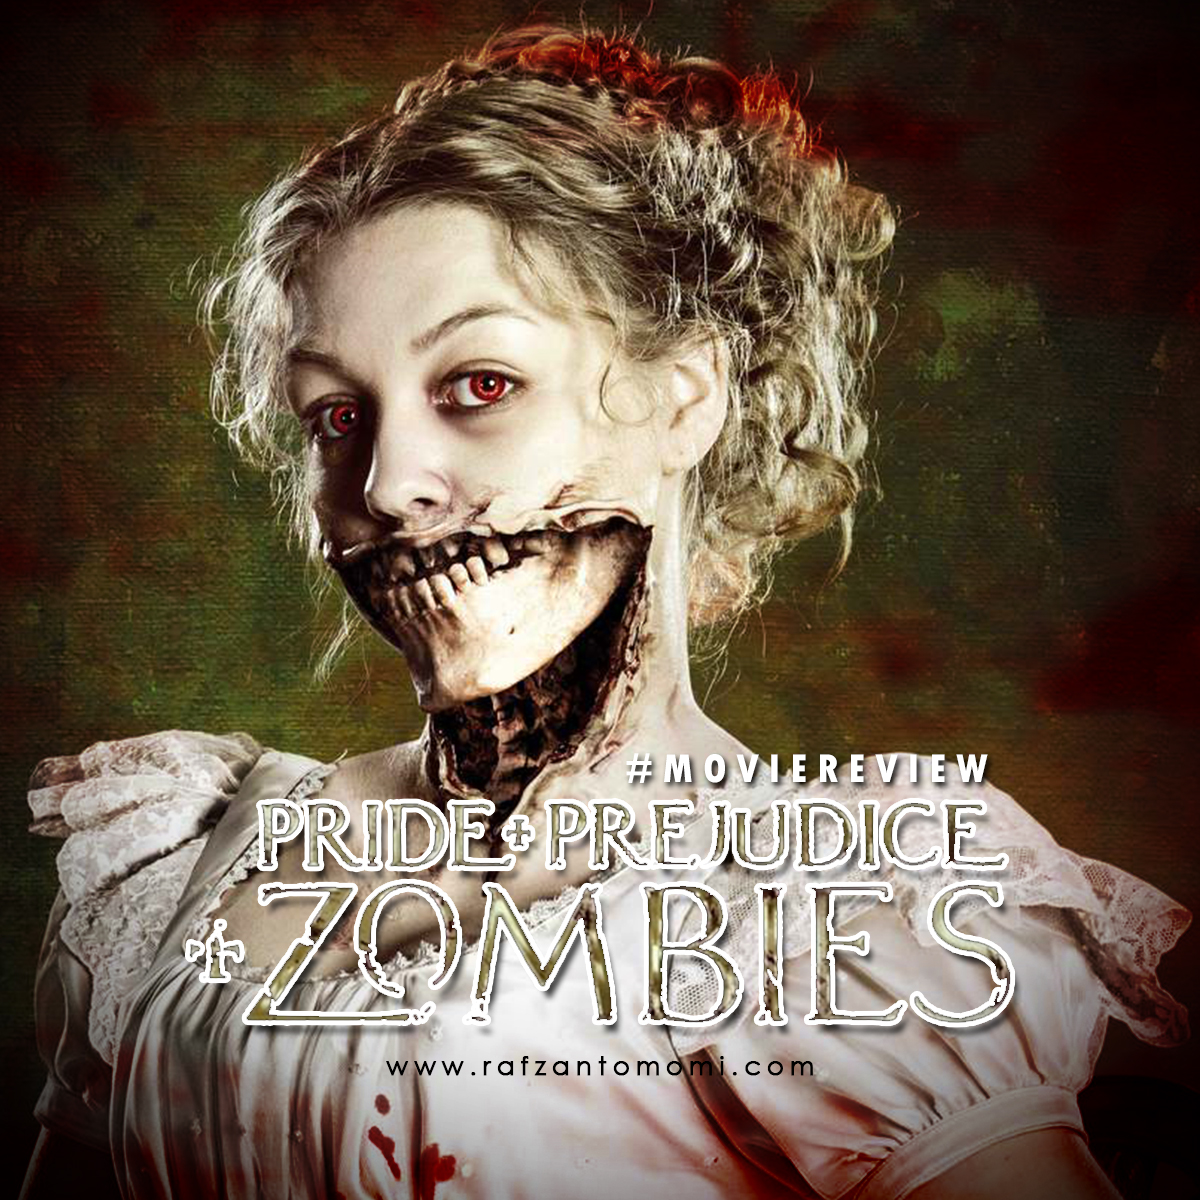 Movie Review - Pride and Prejudice and Zombies